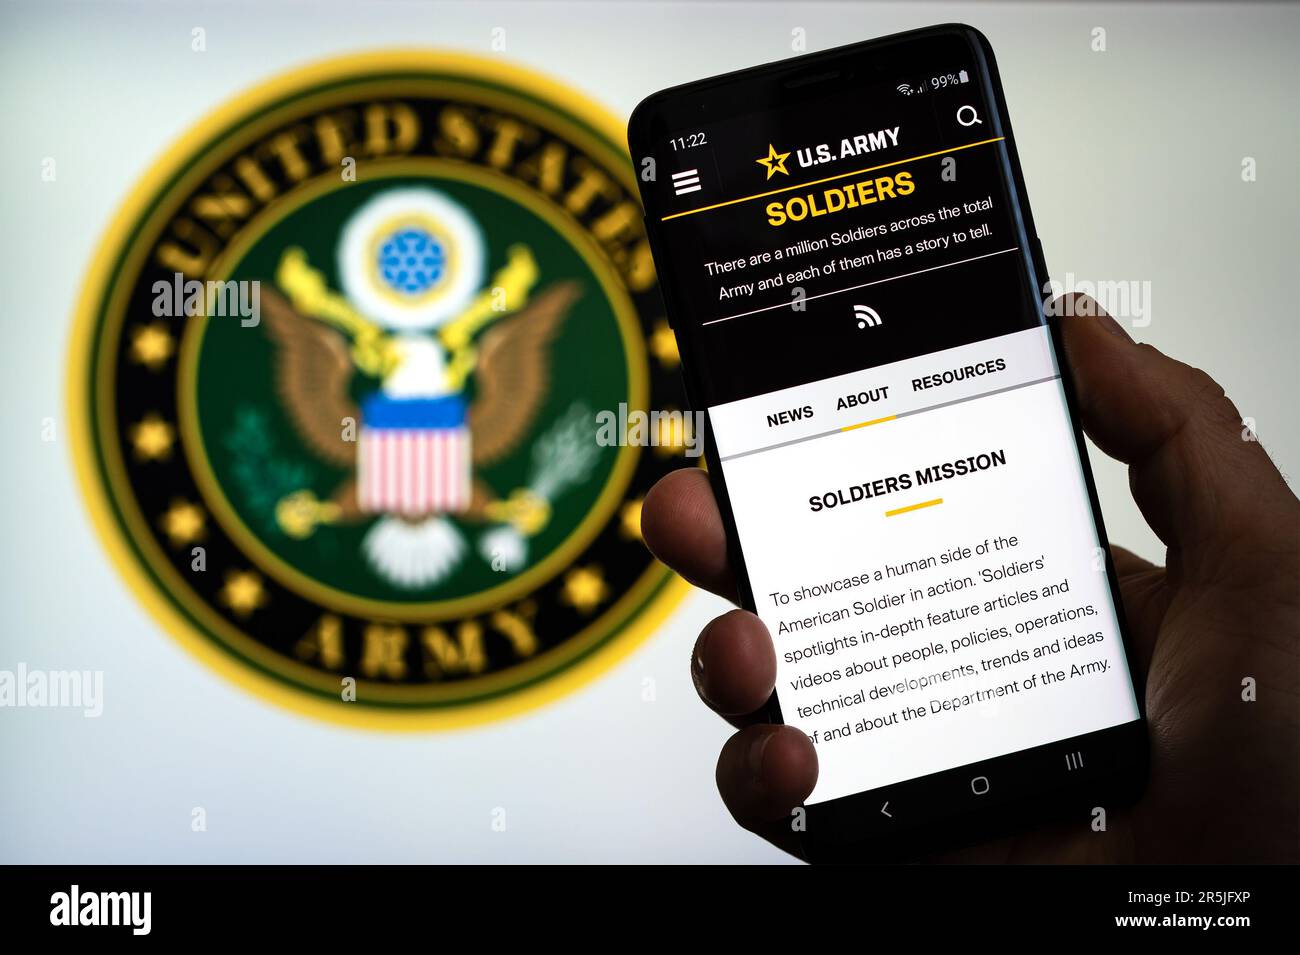 United States Army website on smartphone Stock Photo